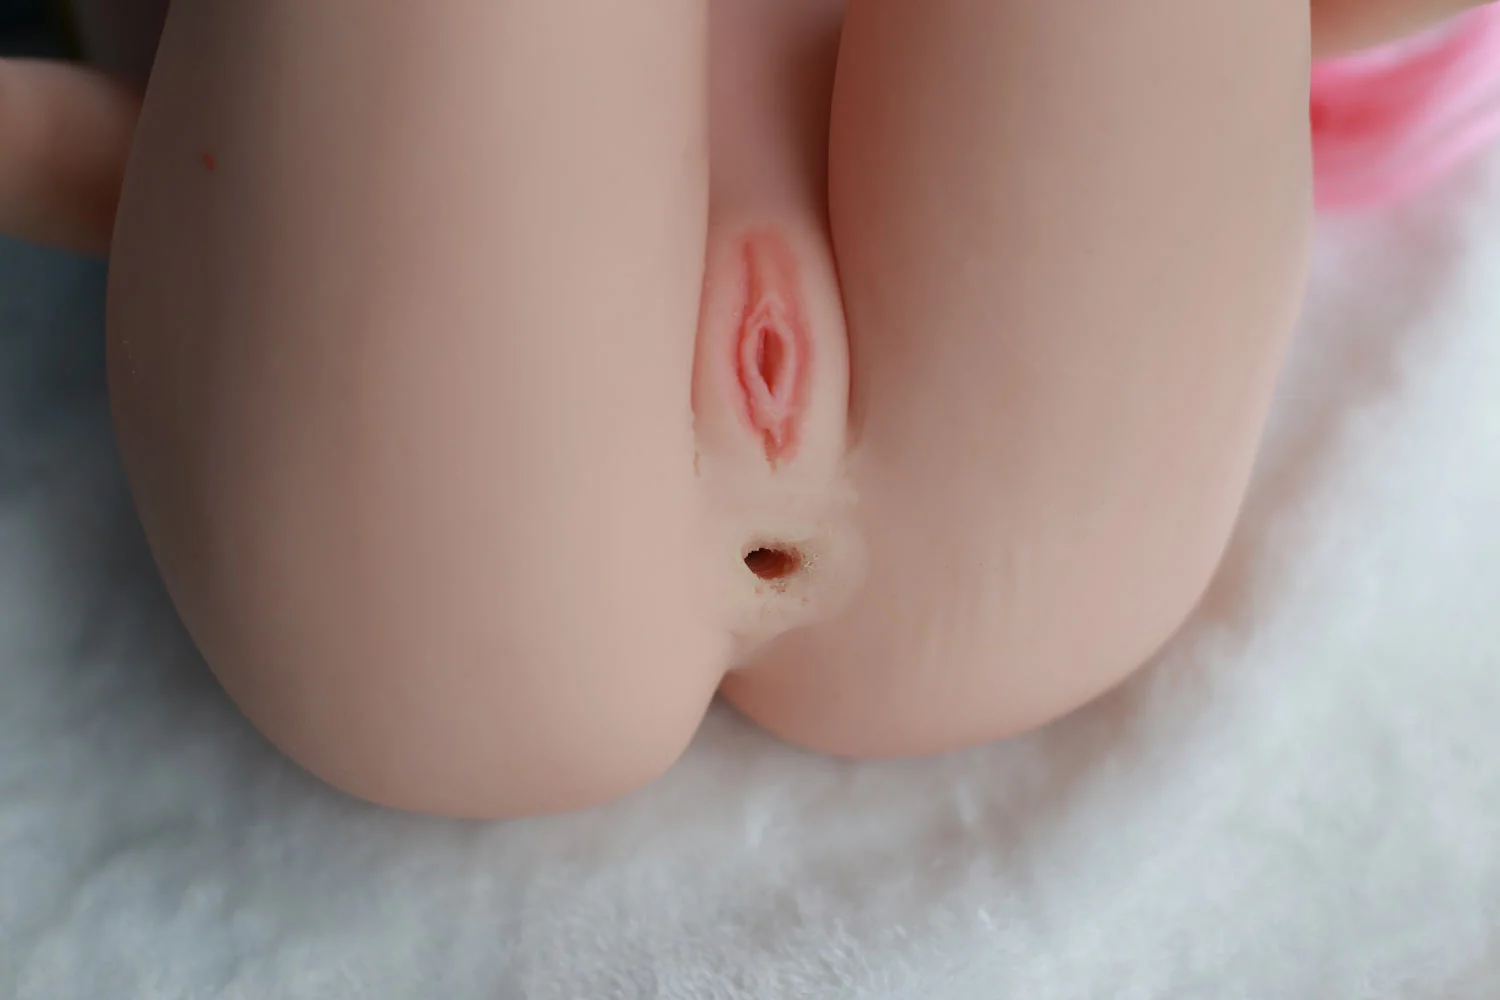 Mini sex doll with anal vagina exposed